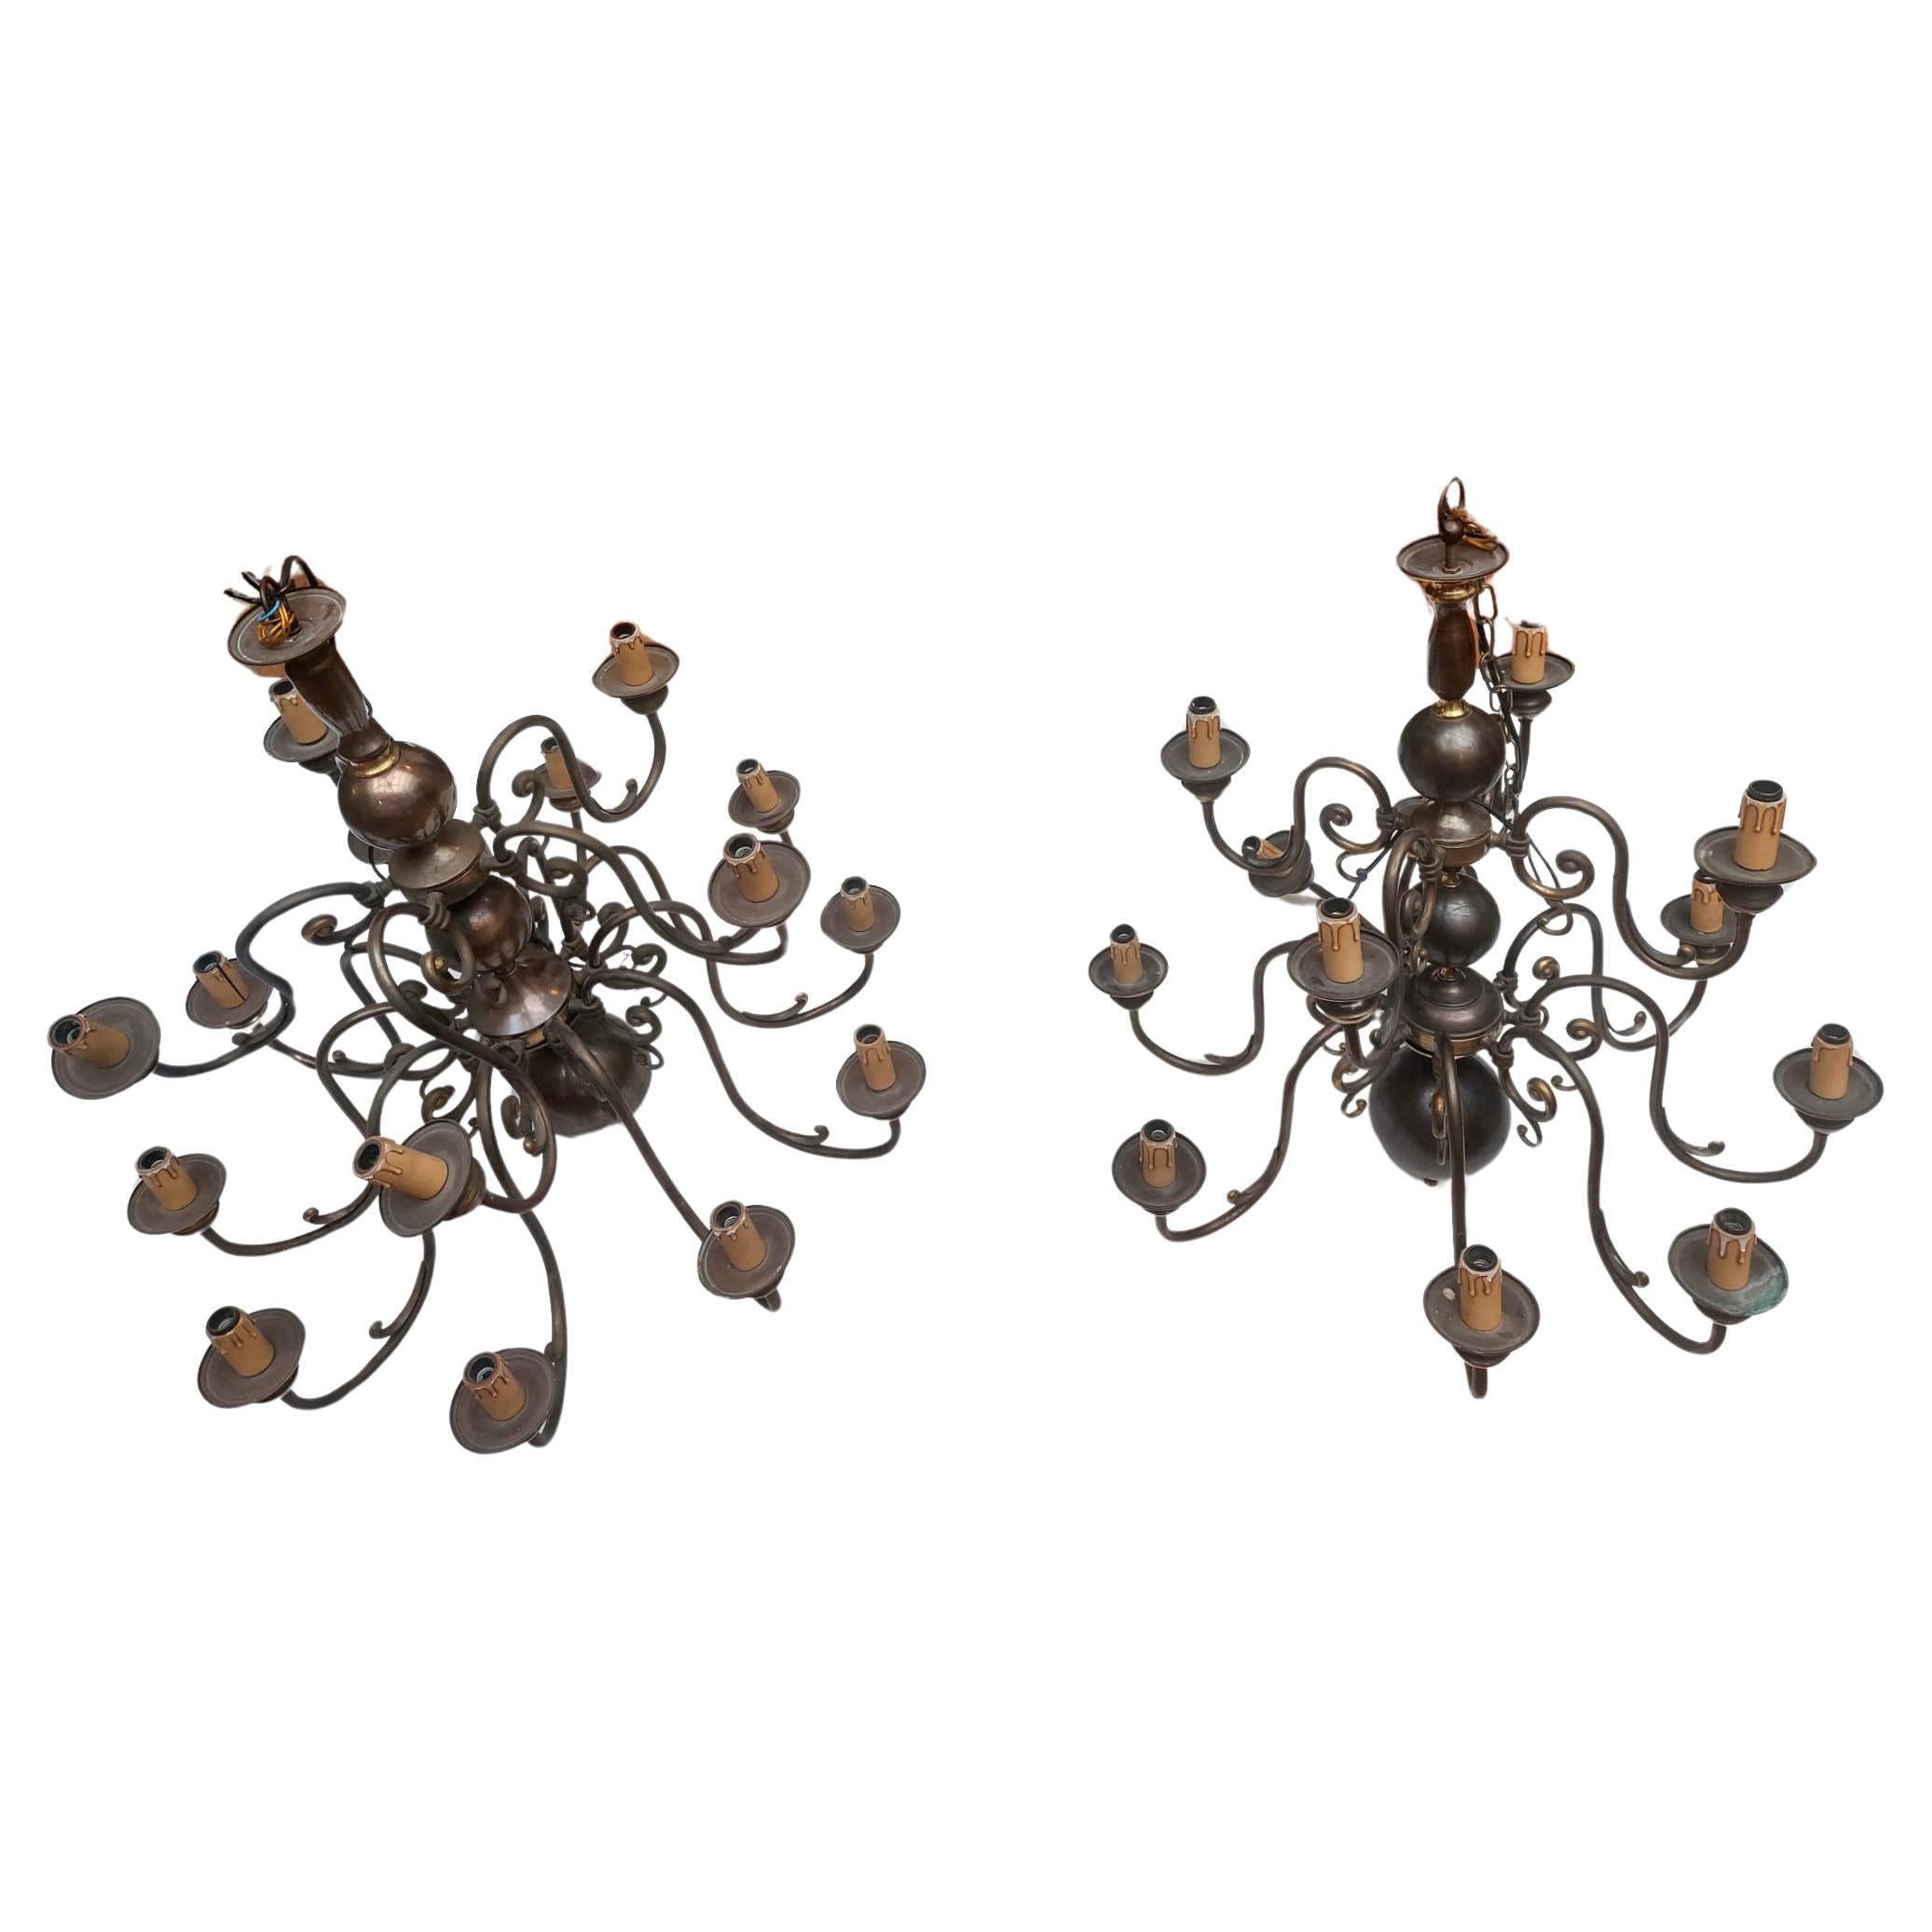 Pair of late 19th century bronze chandeliers in Dutch 17th century style